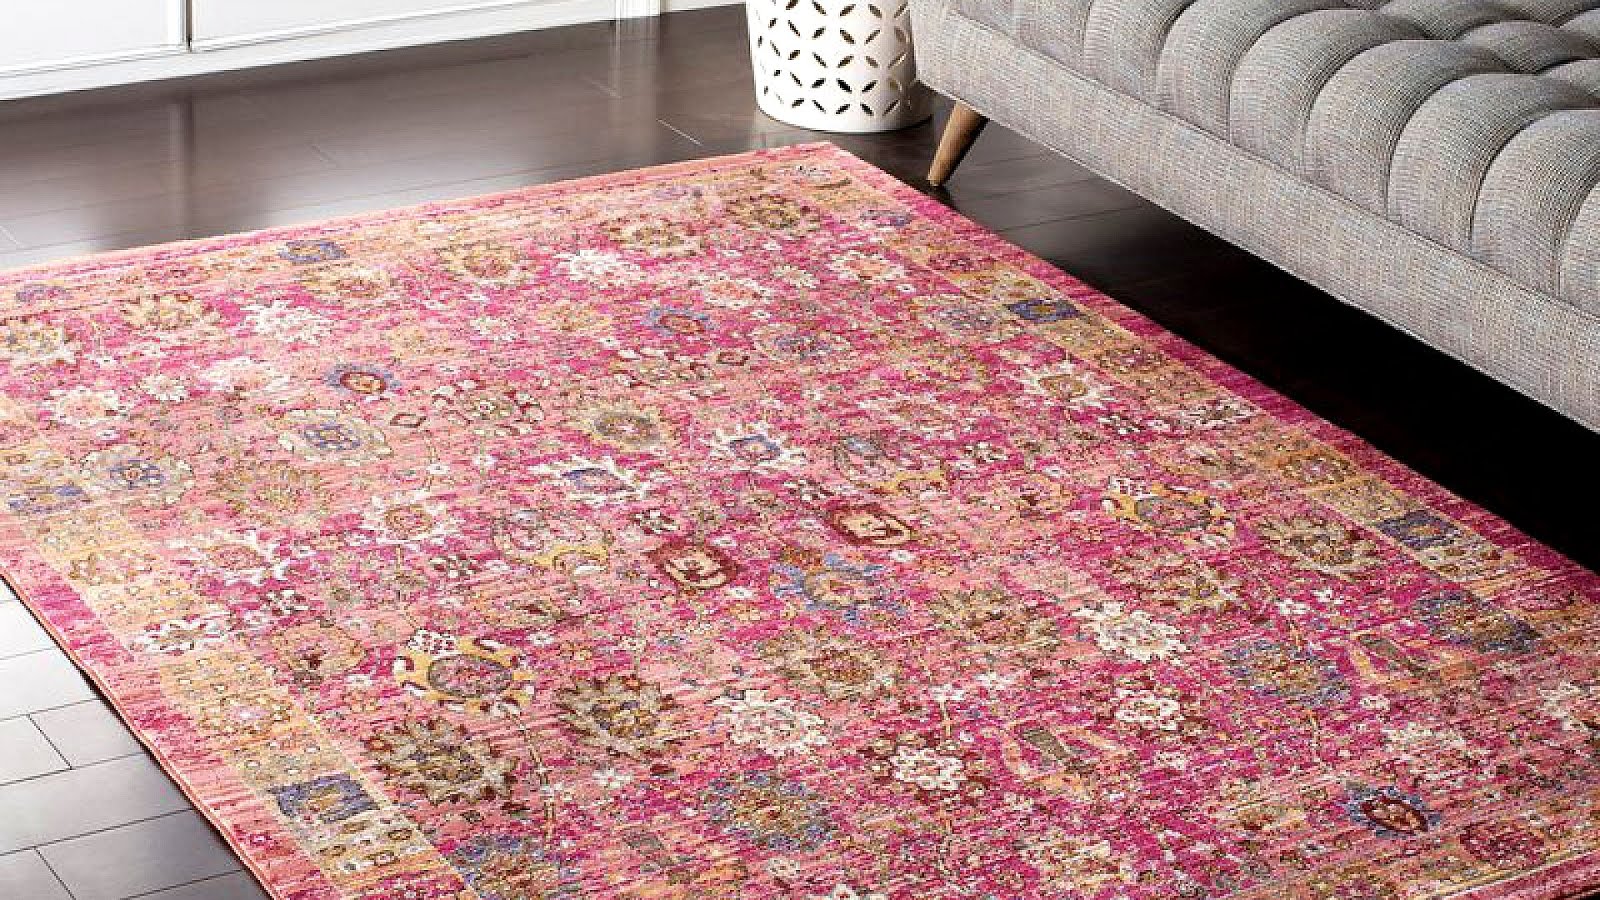 Pink Area Rugs For Living Room